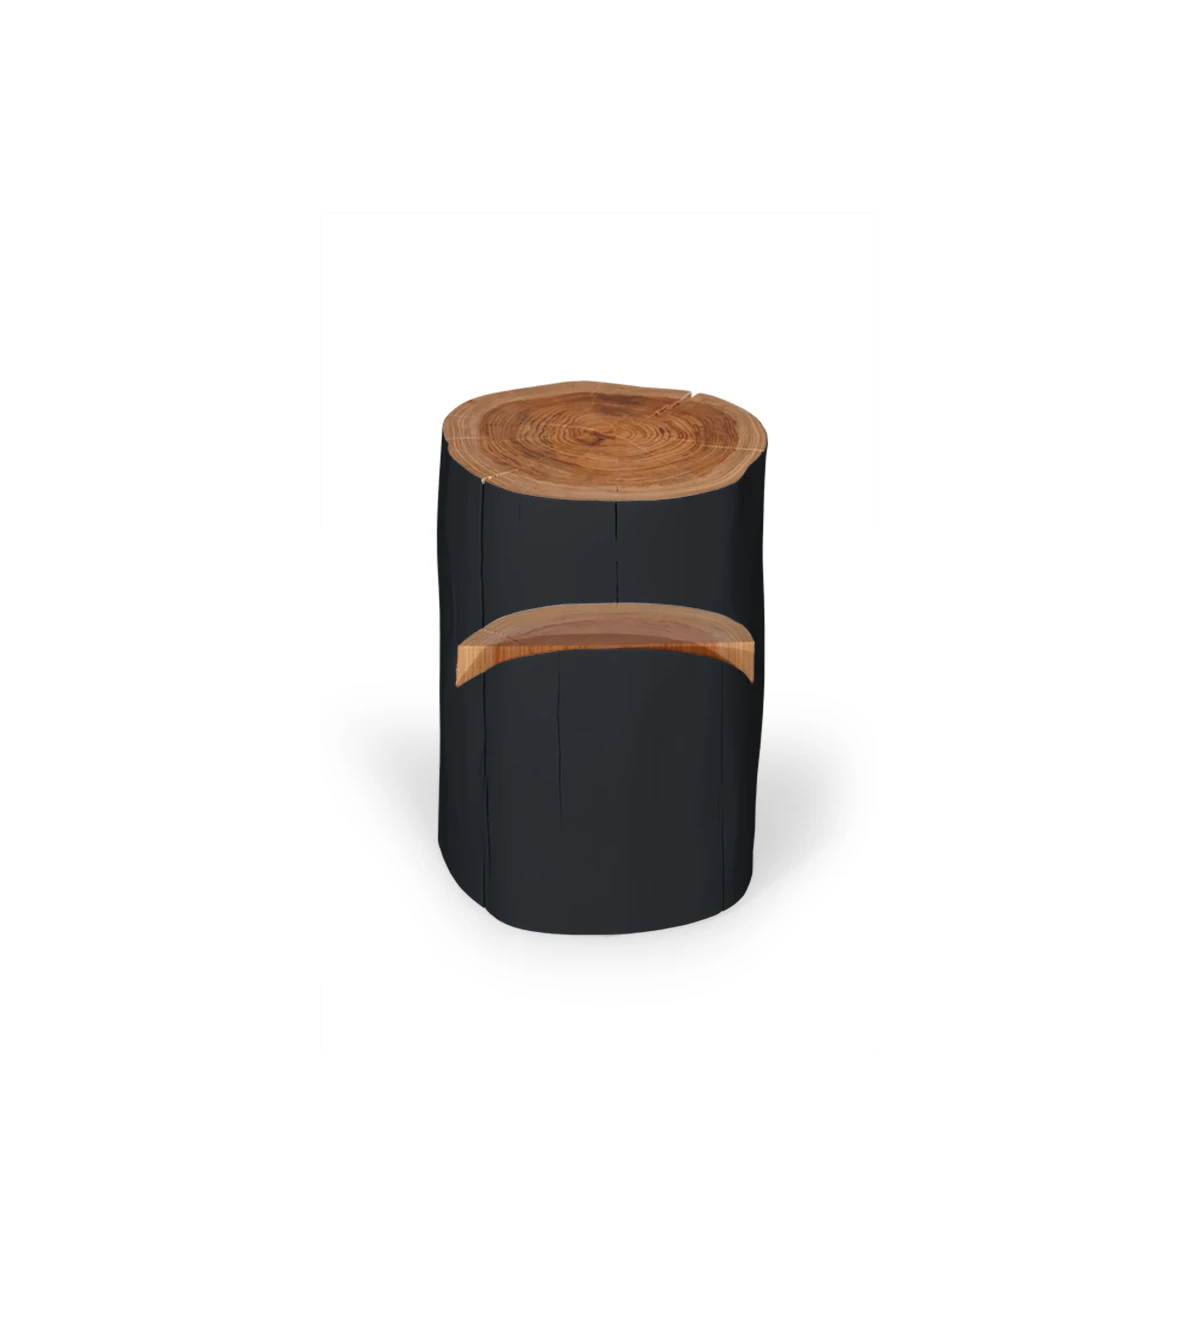 Bedside table in natural cryptomeria wood lacquered in black